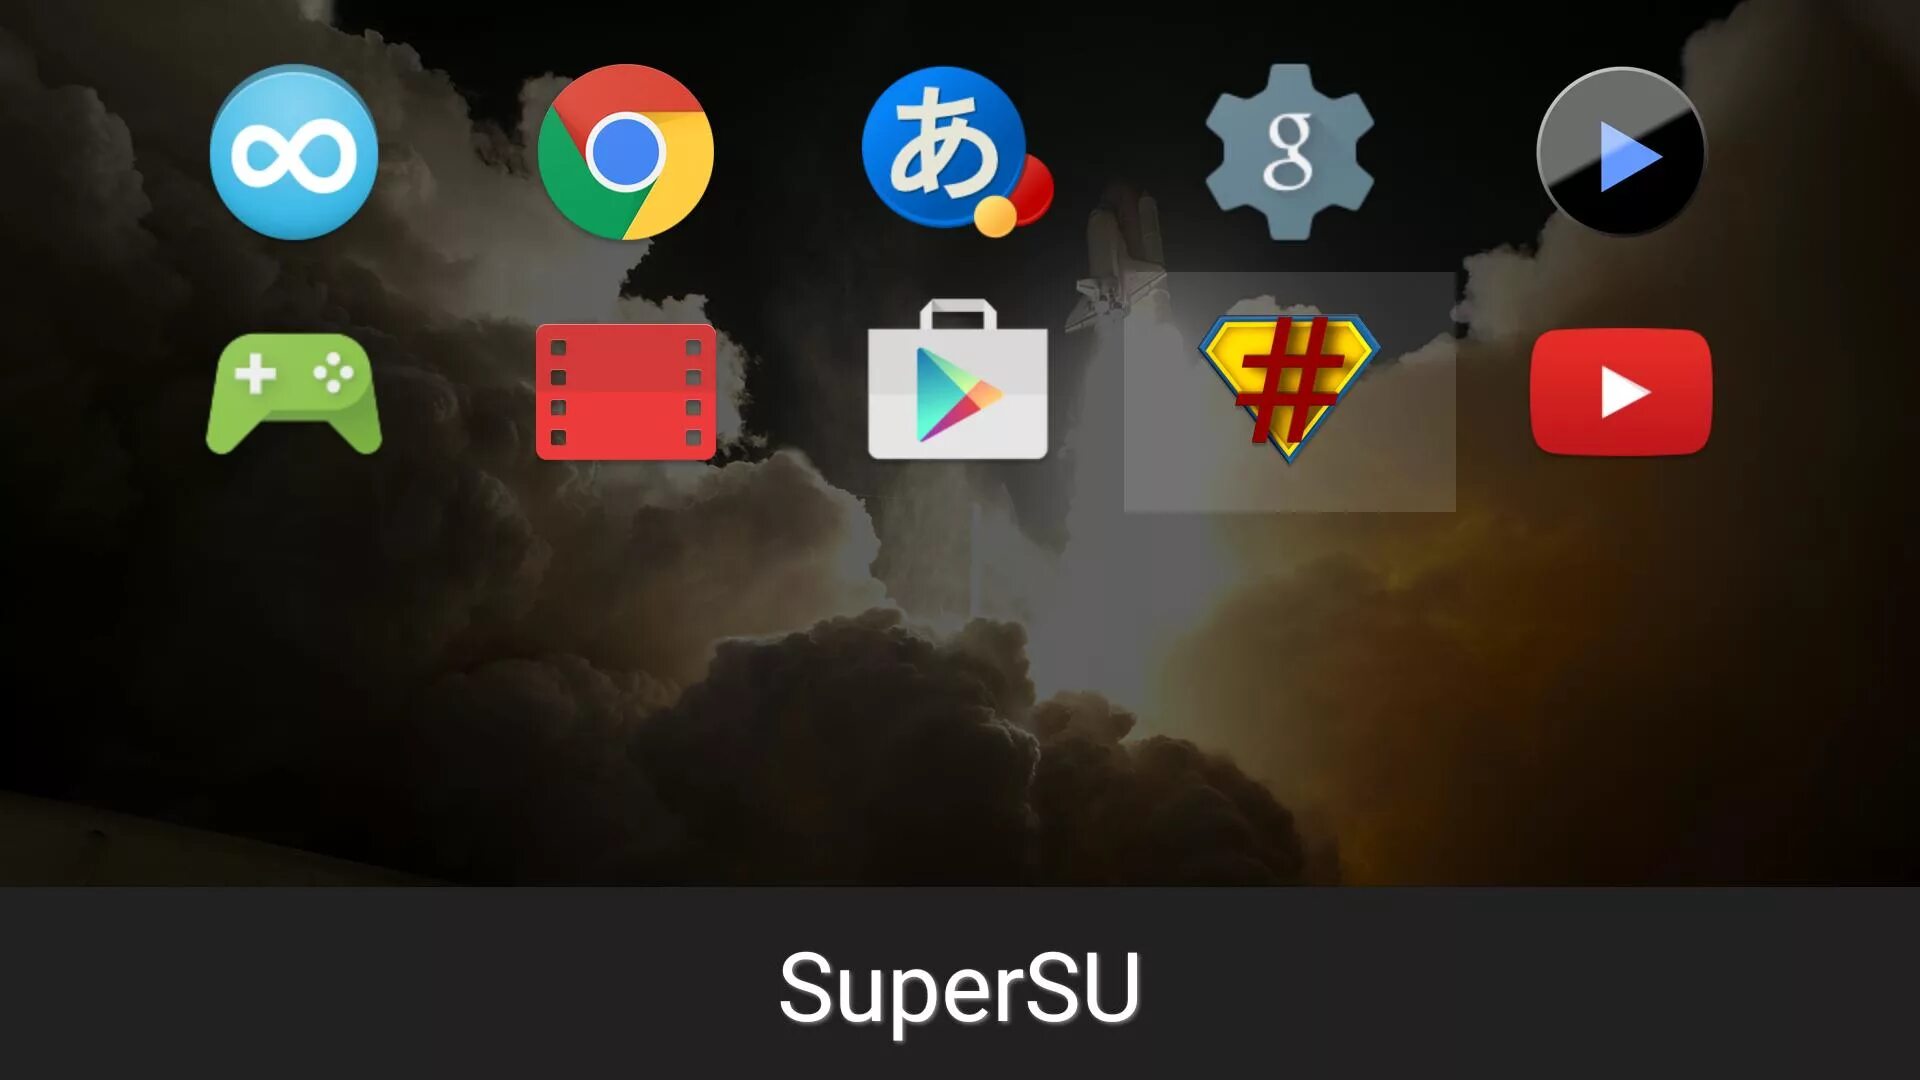 Sideload Launcher - Android TV. Приложение Sideload Launcher. Launcher для андроид. Лаунчер для андроид.